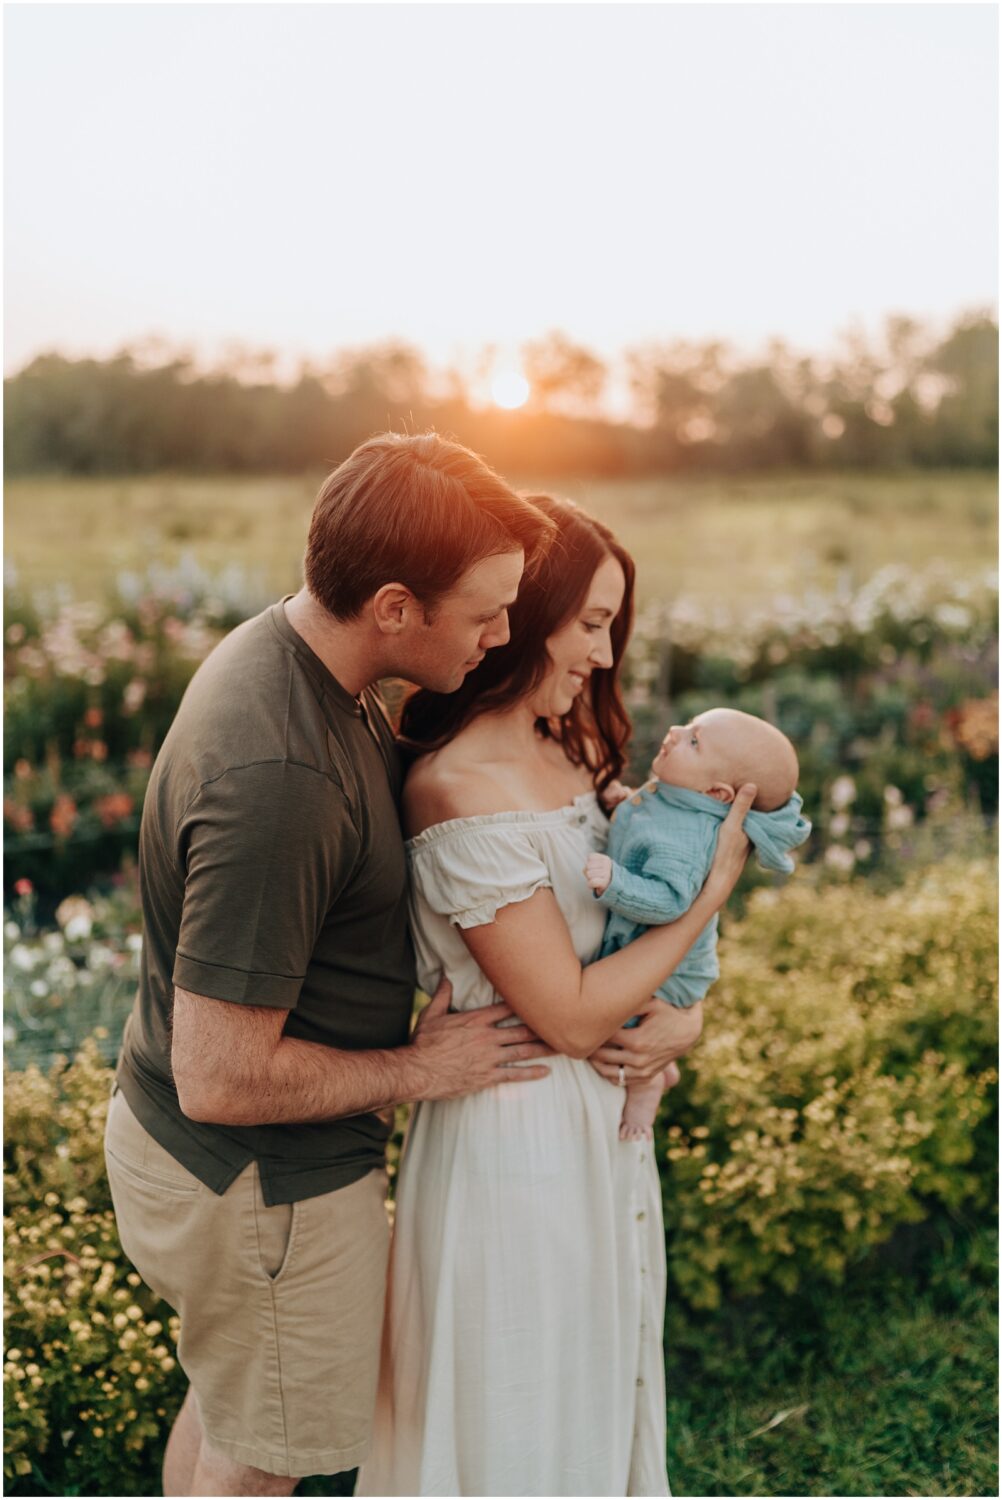 Edmonton family photographer session in a flower farm with a newborn